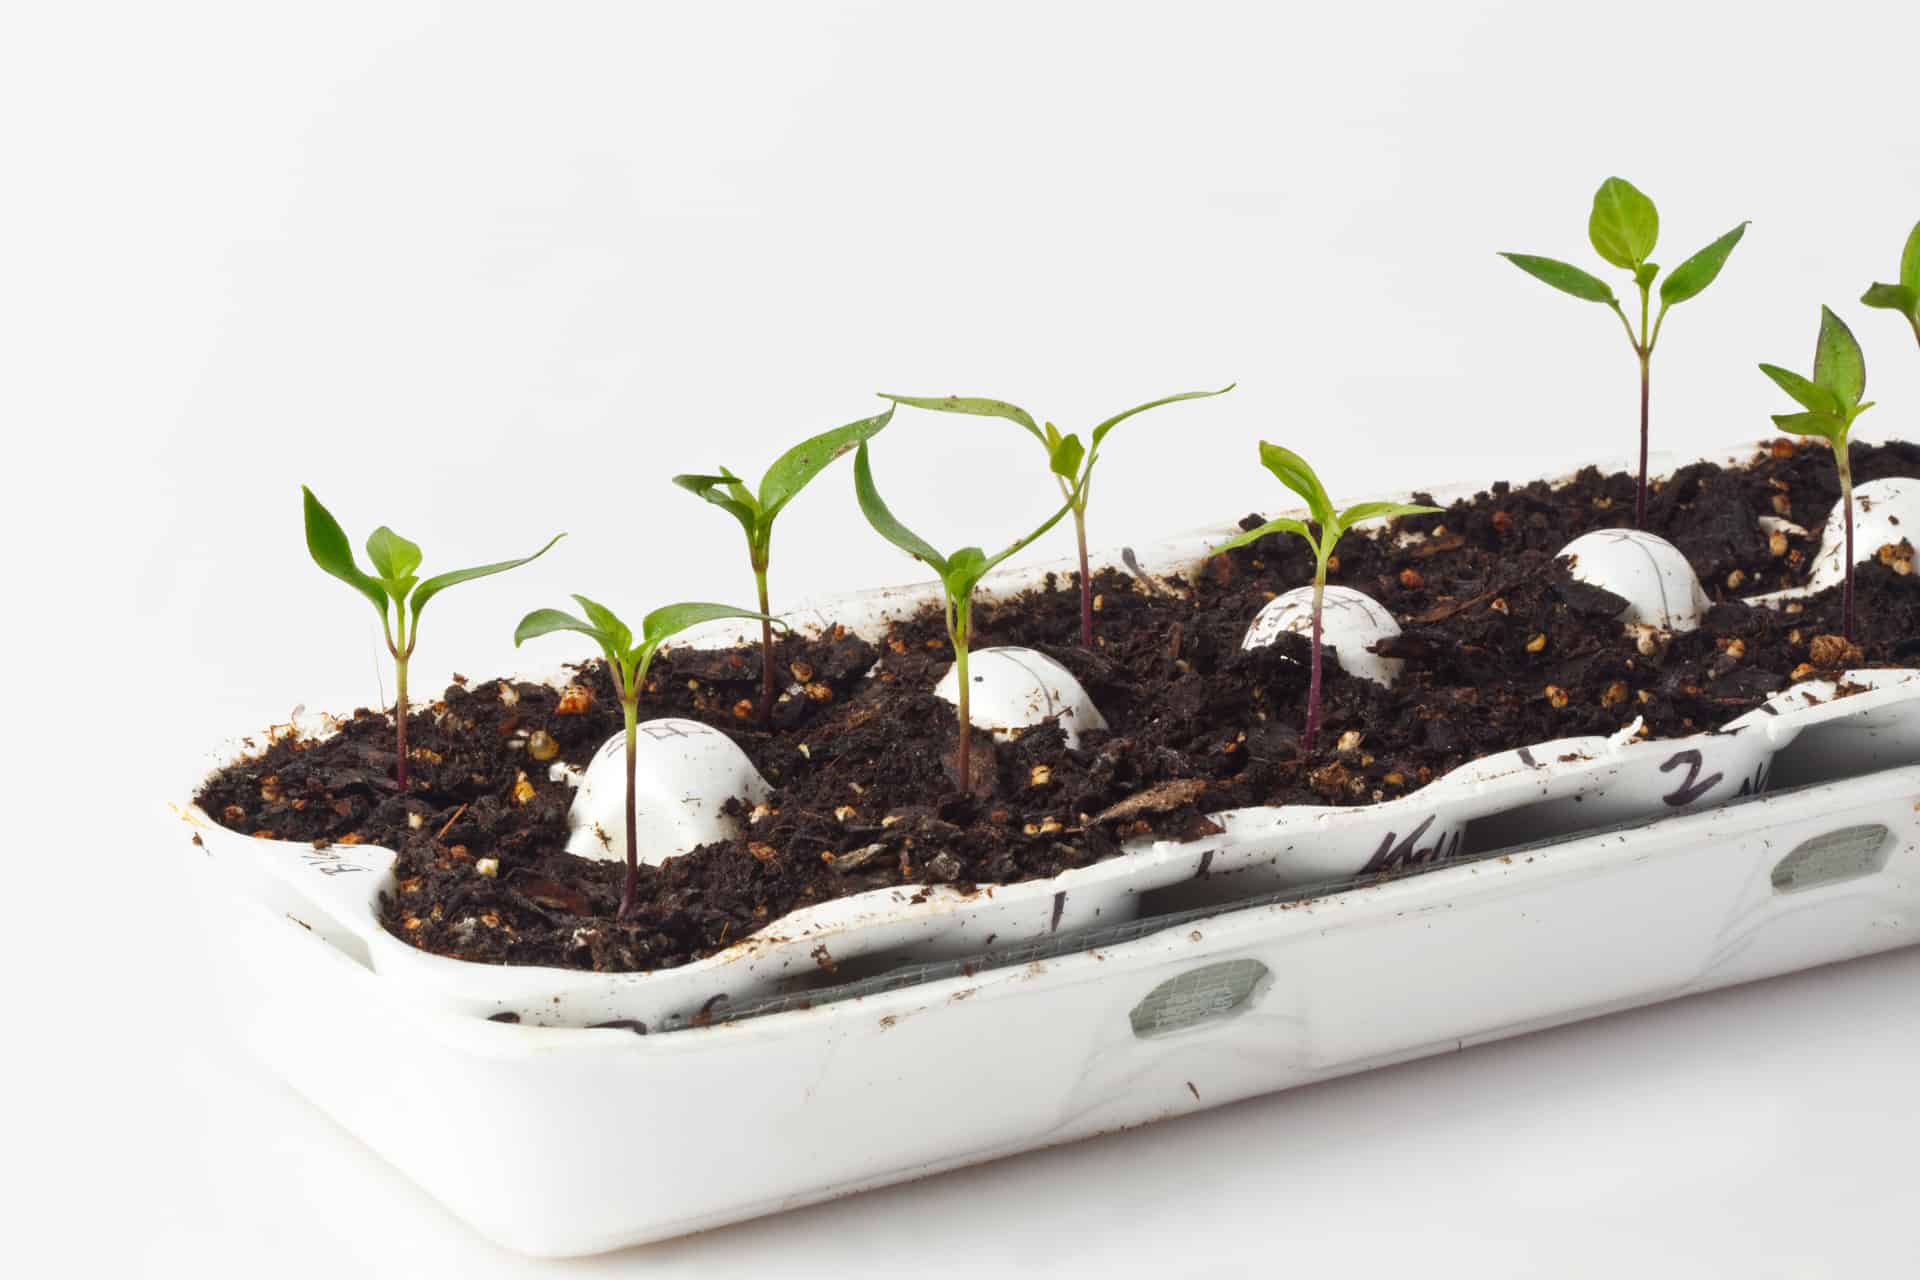 An illustration of reusing paper or plastic egg cartons as seed starters in a zero waste lifestyle